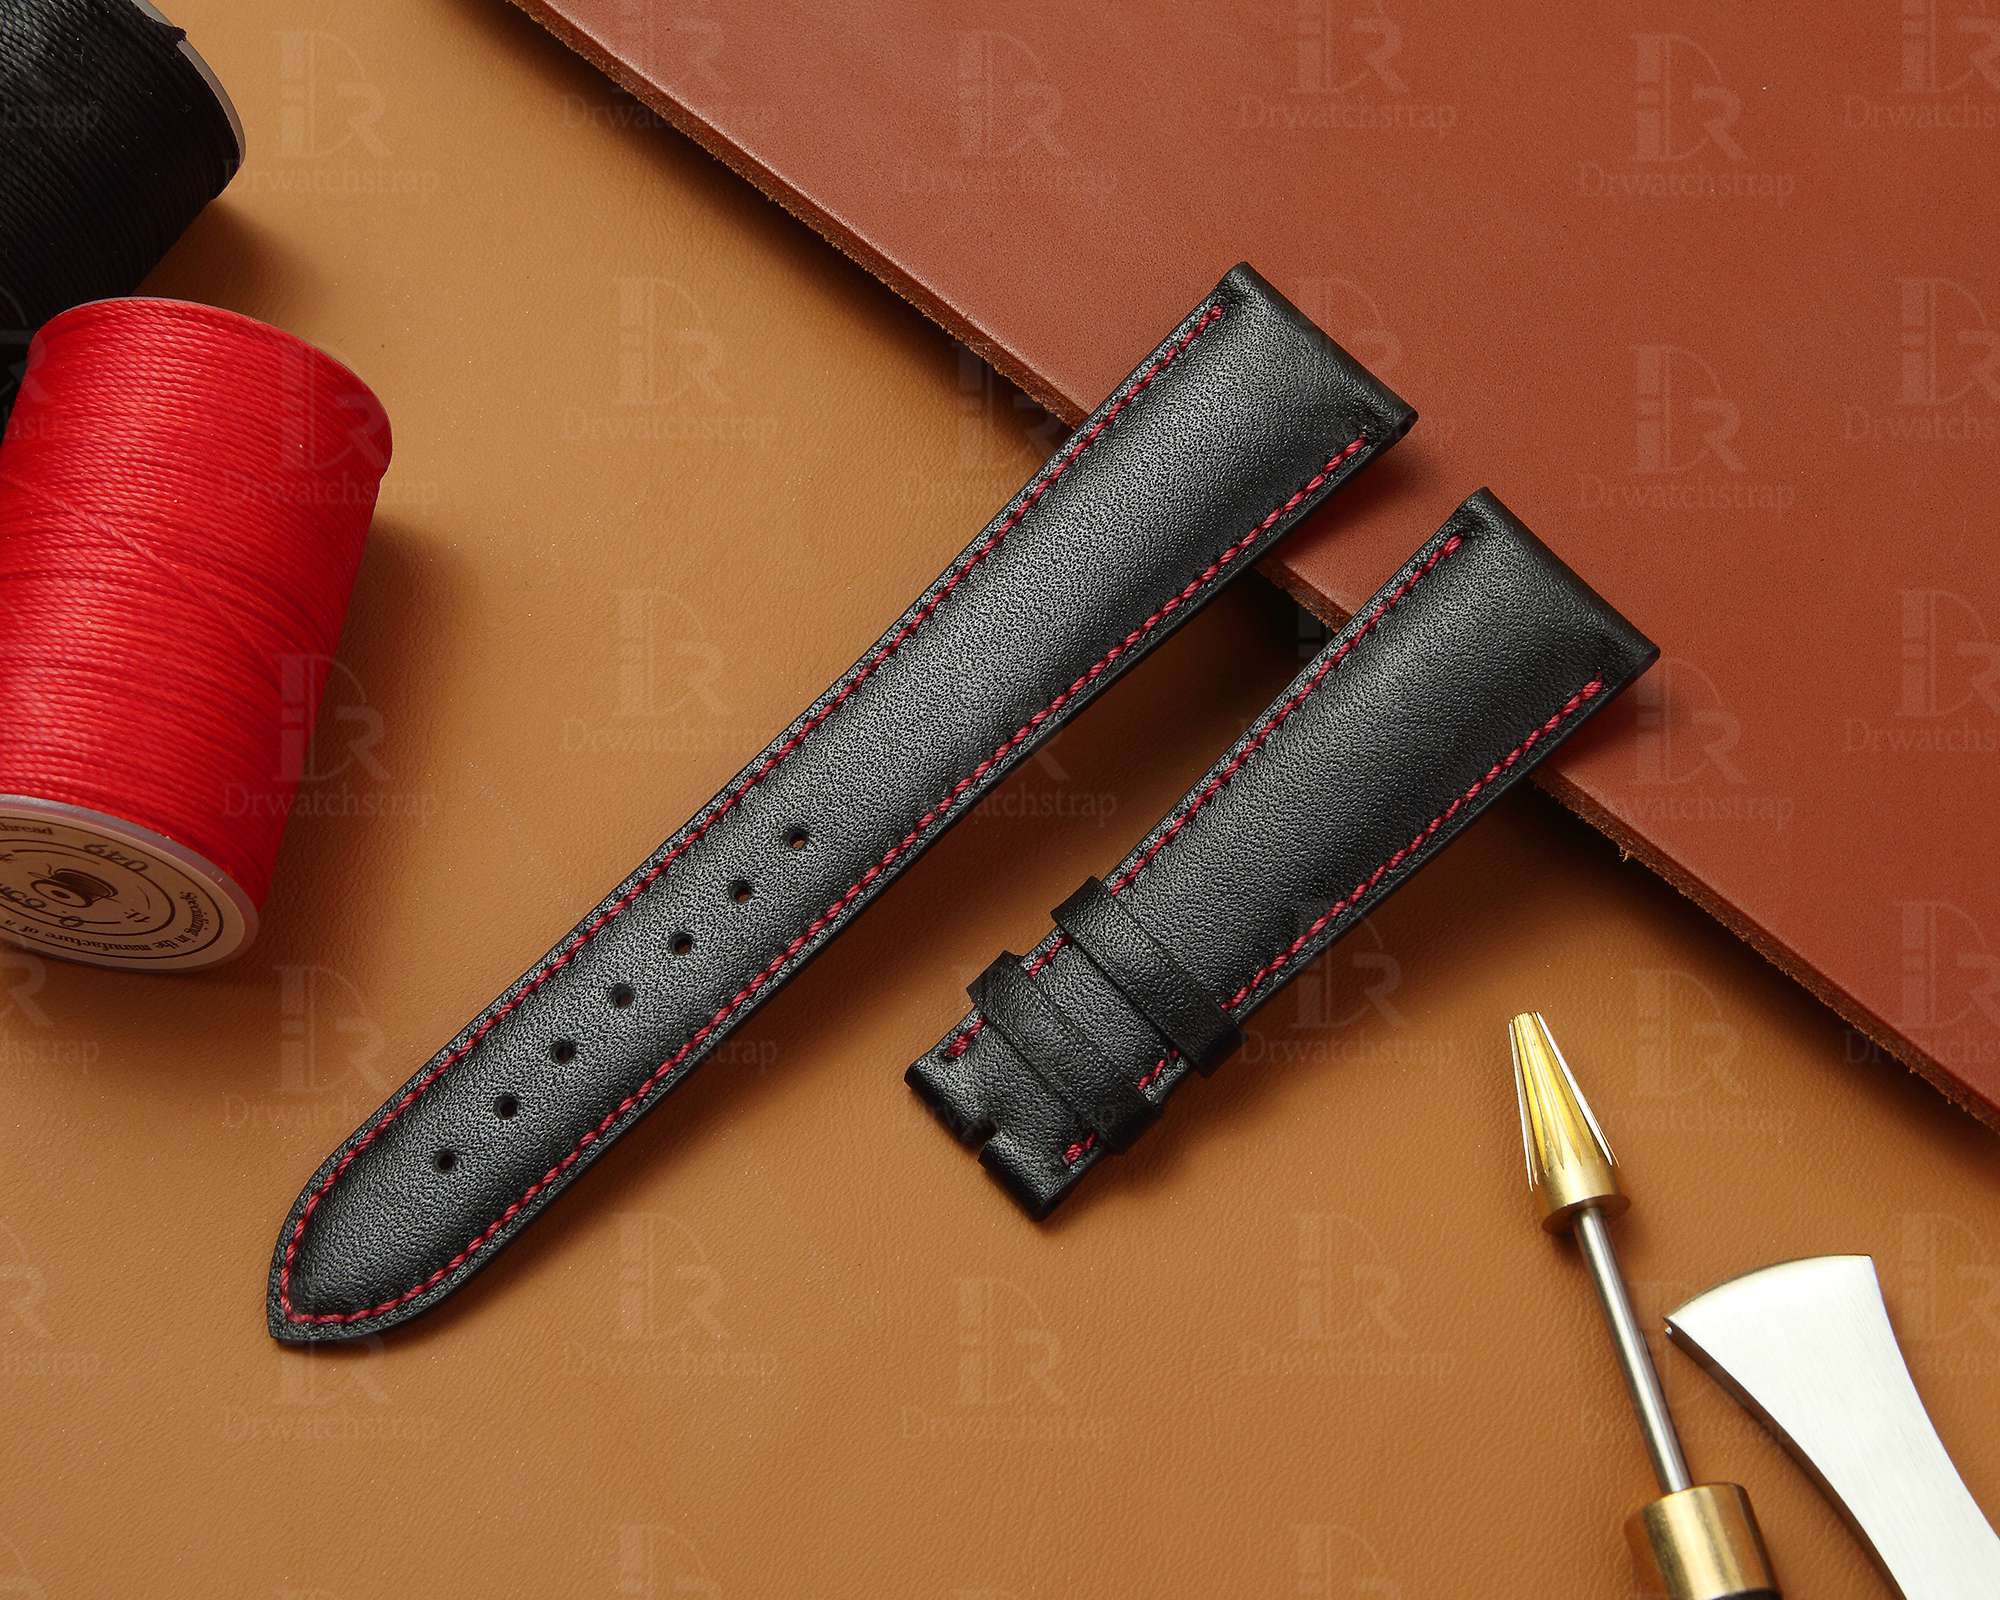 Best quality handmade OEM premium black calfskin replacement Tudor leather strap and watch band with red linning for Black Bay 58 41 GMT Heritage luxury watches 20mm 22mm 24mm online at a low price - Shop the premium watchs traps and watchbands online